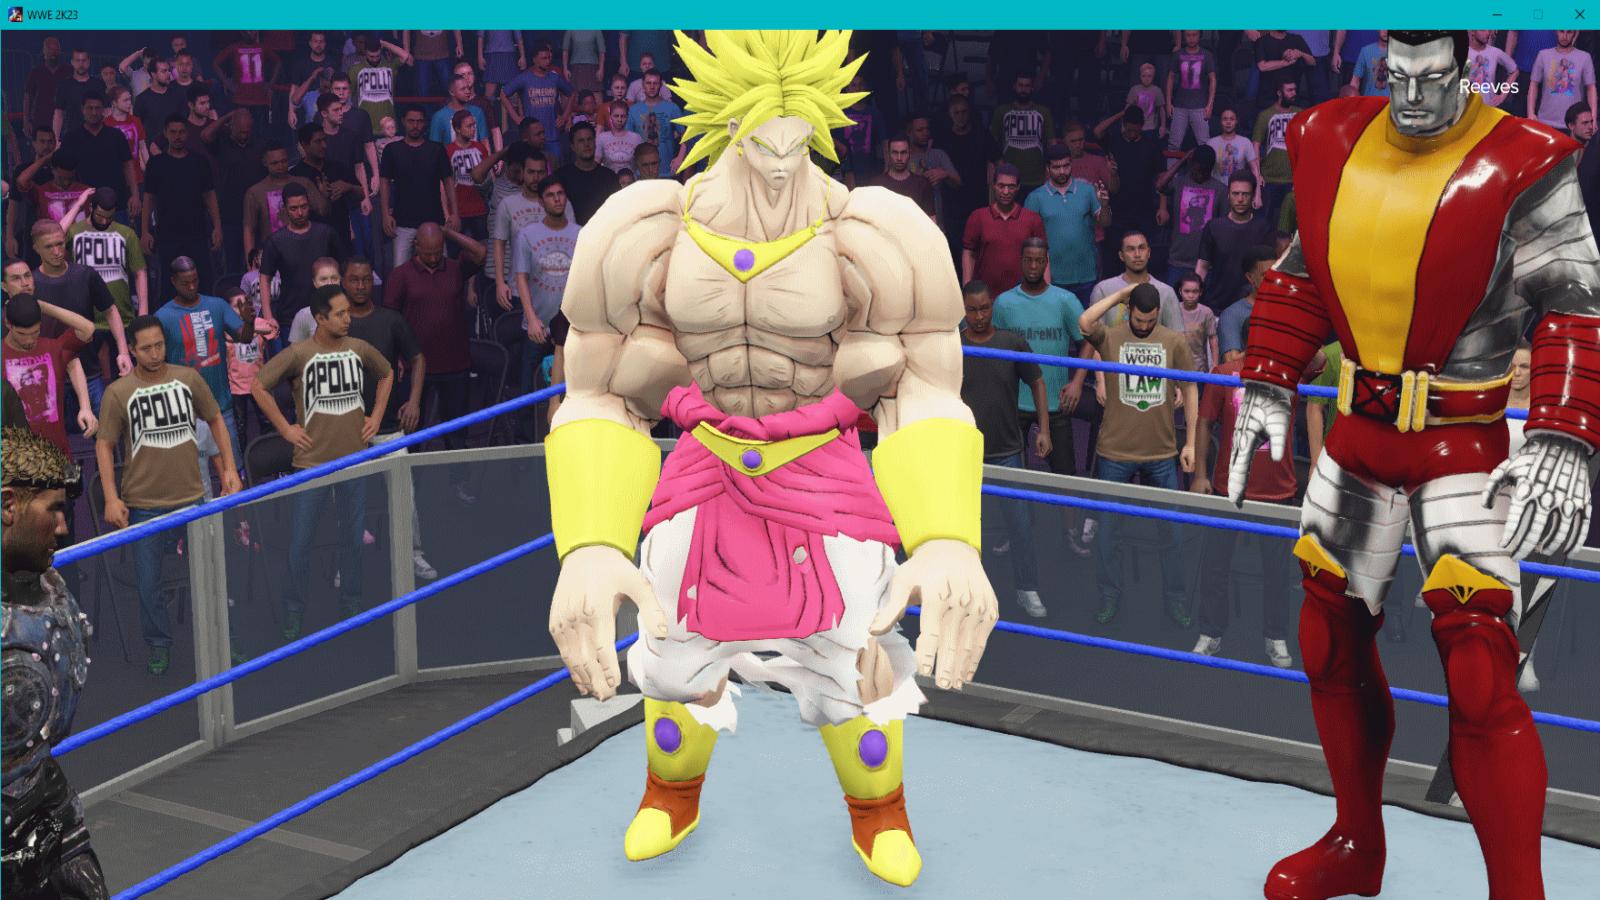 Free Play Days - WWE 2K23, Descenders, and Dragon Ball FighterZ - Xbox Wire